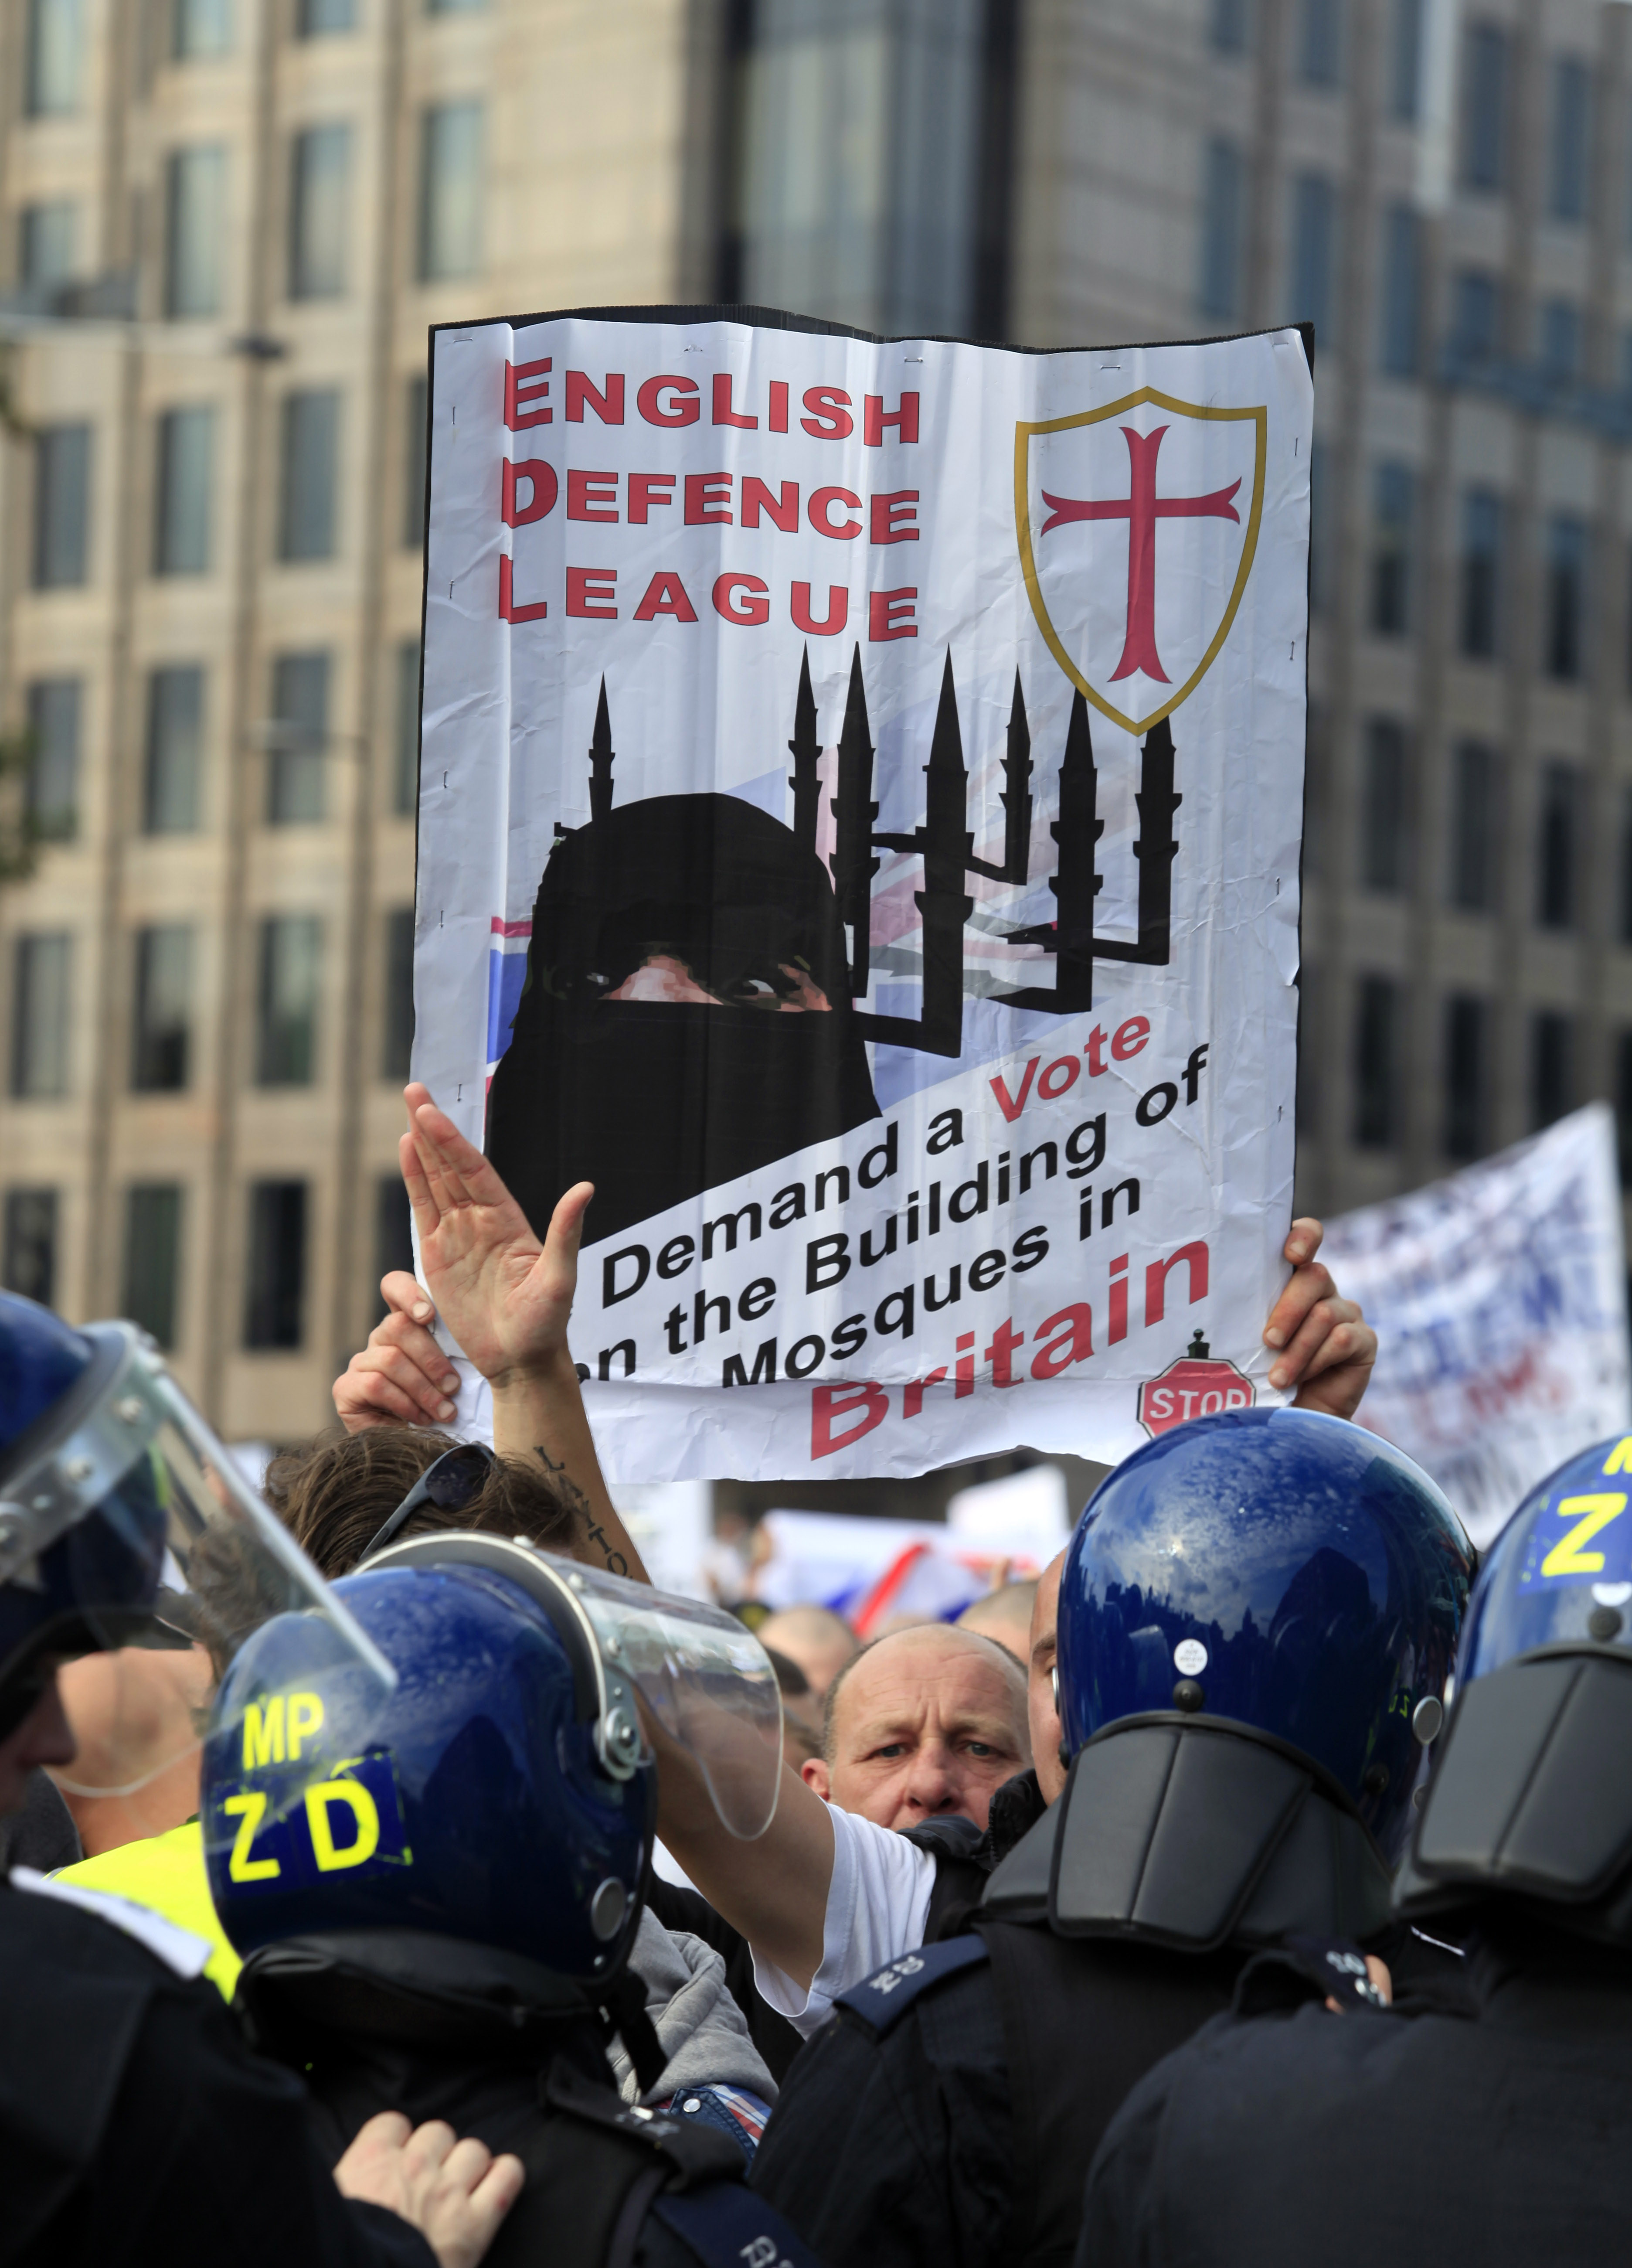 Swedish Defence League, Demonstration, Protester, Muslimer, Högerextrema, English Defence League